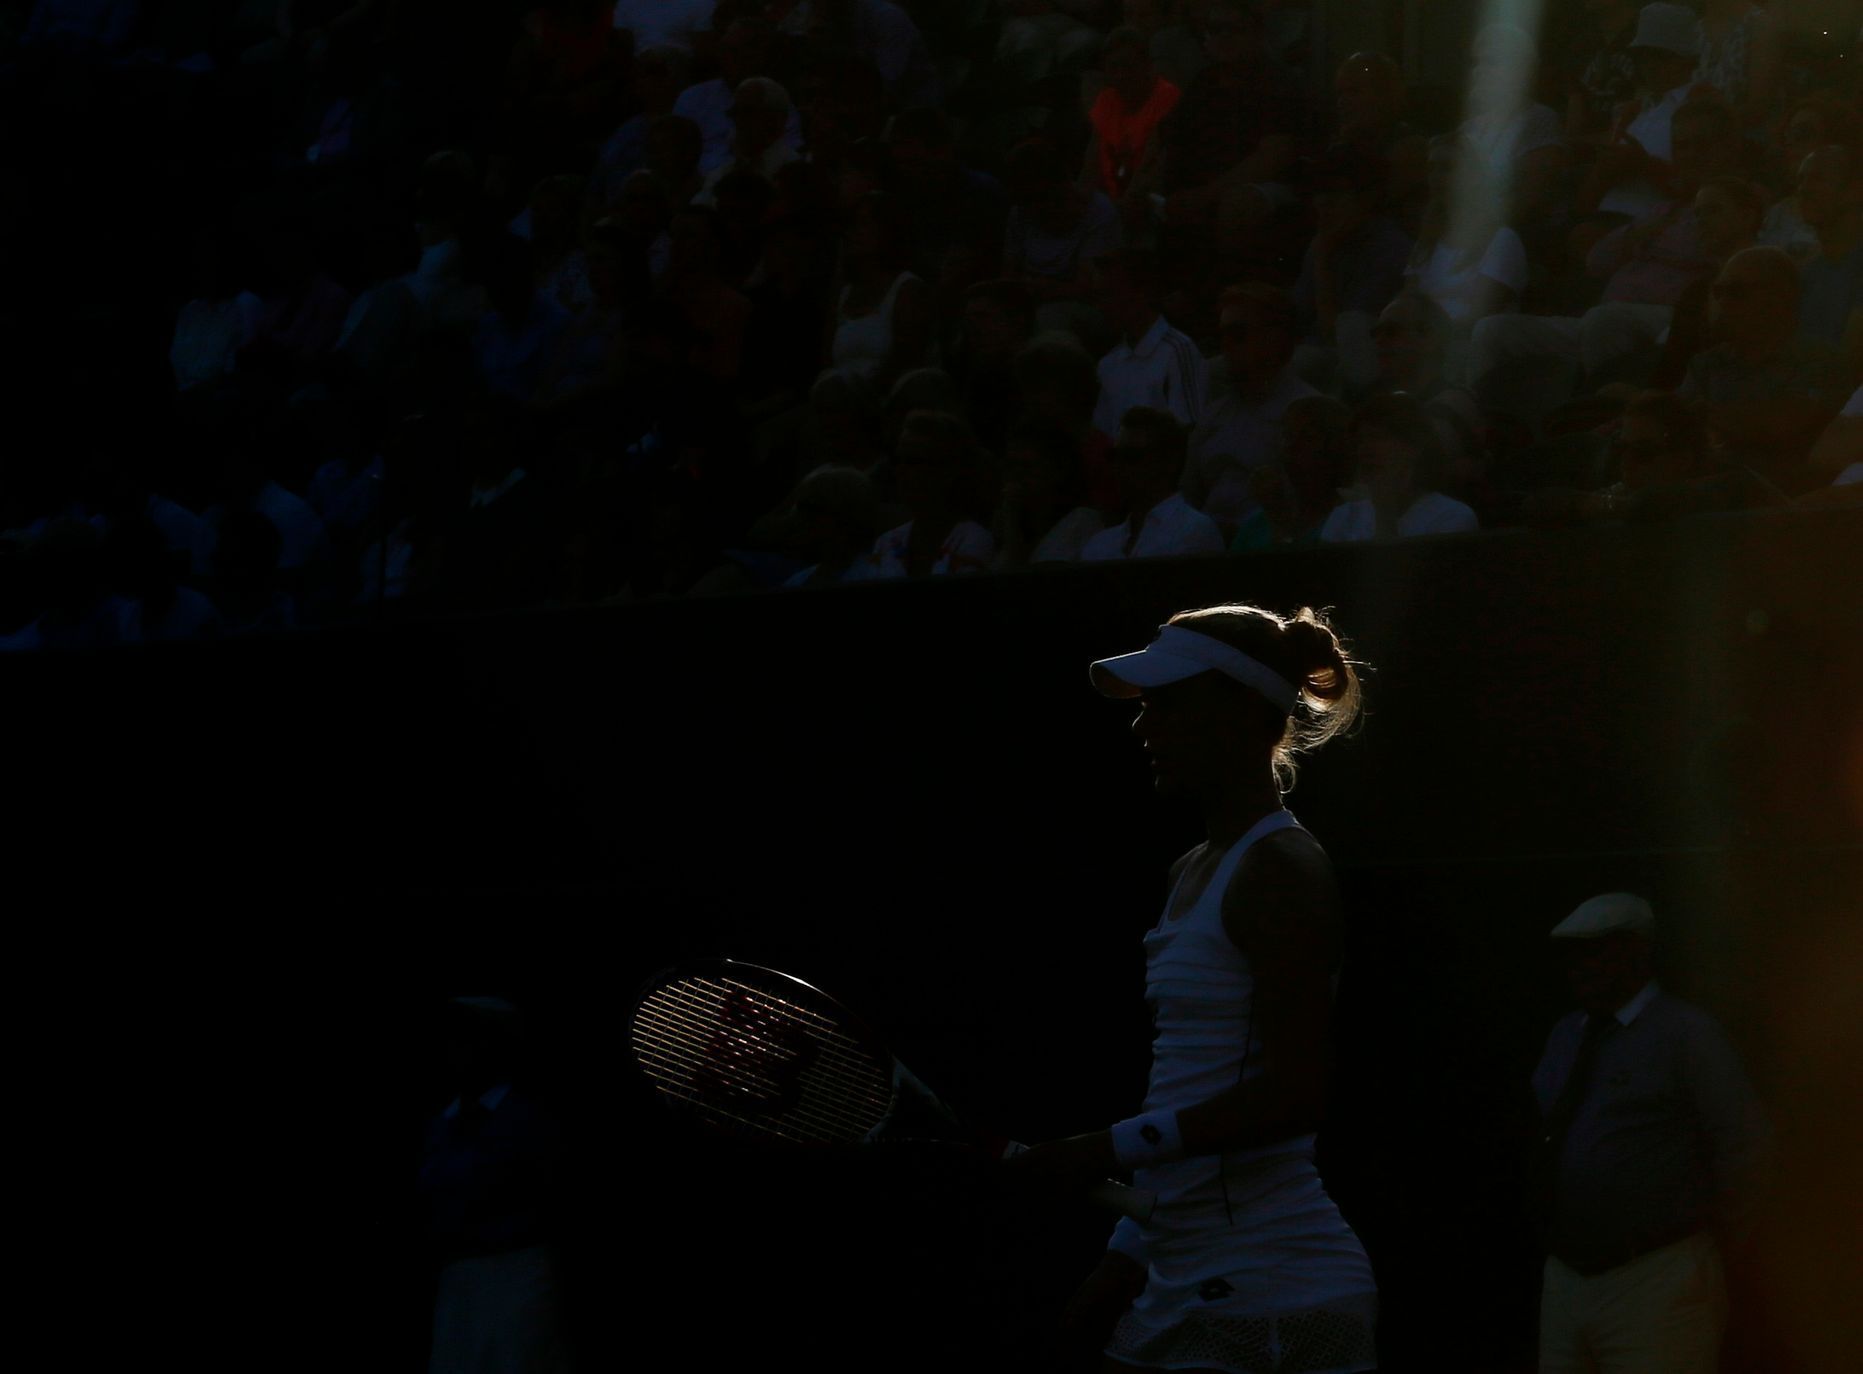 Afternoon sunlight shines on Lucie Safarova of the Czech Republic during her match against Alison Riske of the U.S.A. at the Wimbledon Tennis Championships in London